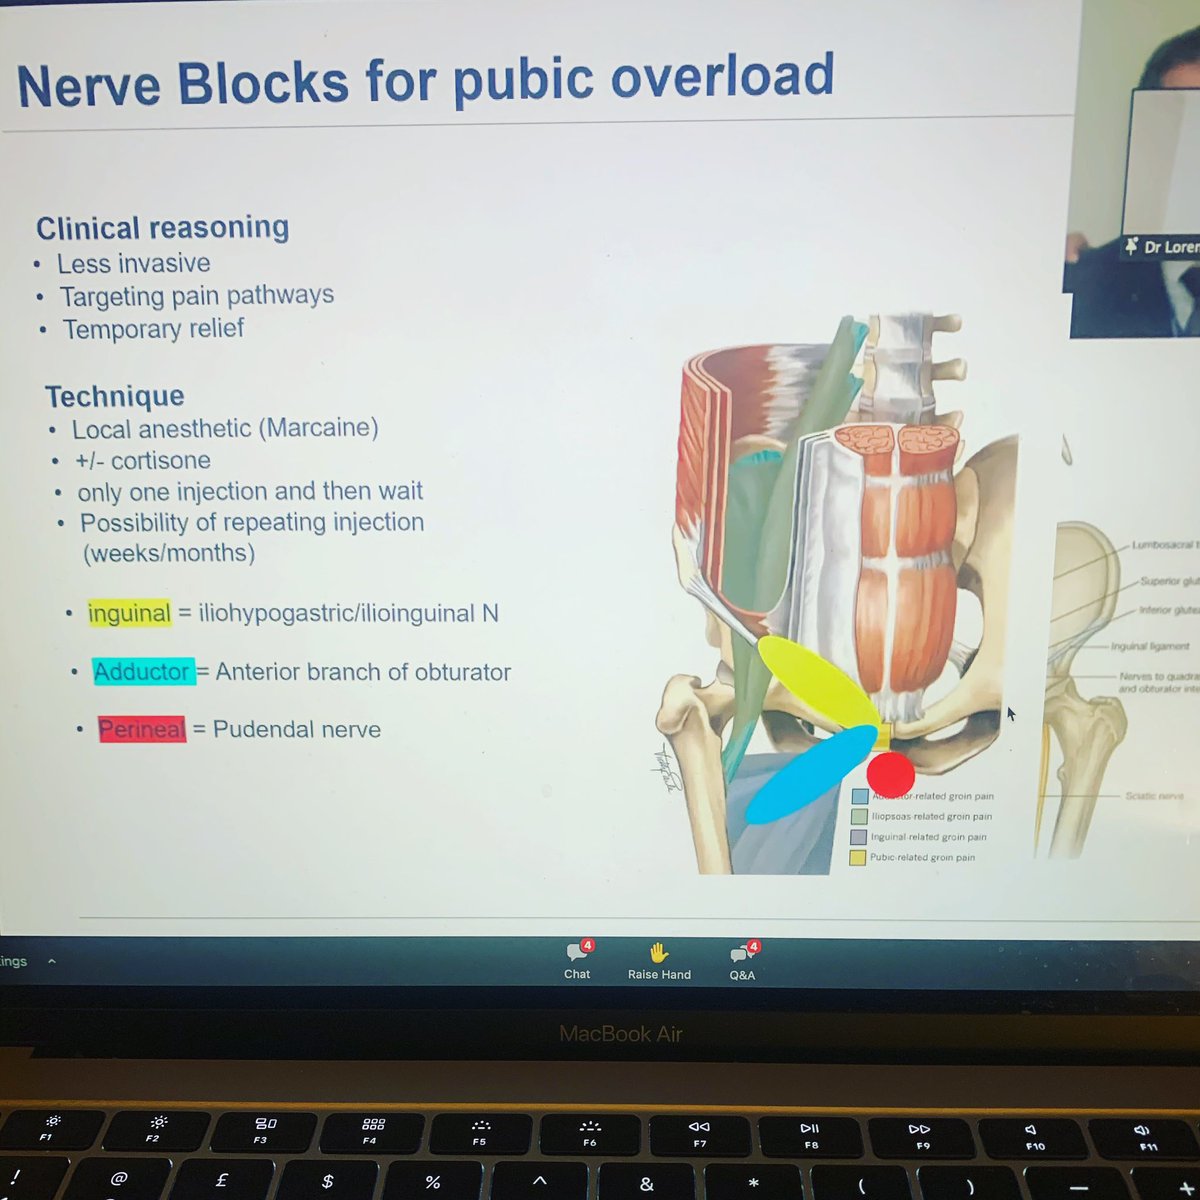 Thanks @lorenzo_masci and @one_welbeck for another great webinar on the sporting hip and groin!
#pubicoverload #hiparthroscopy #injectiontherapy #hernia #endometriosis #pelvicimaging #bedfordphysio #londonphysio #onlinephysio